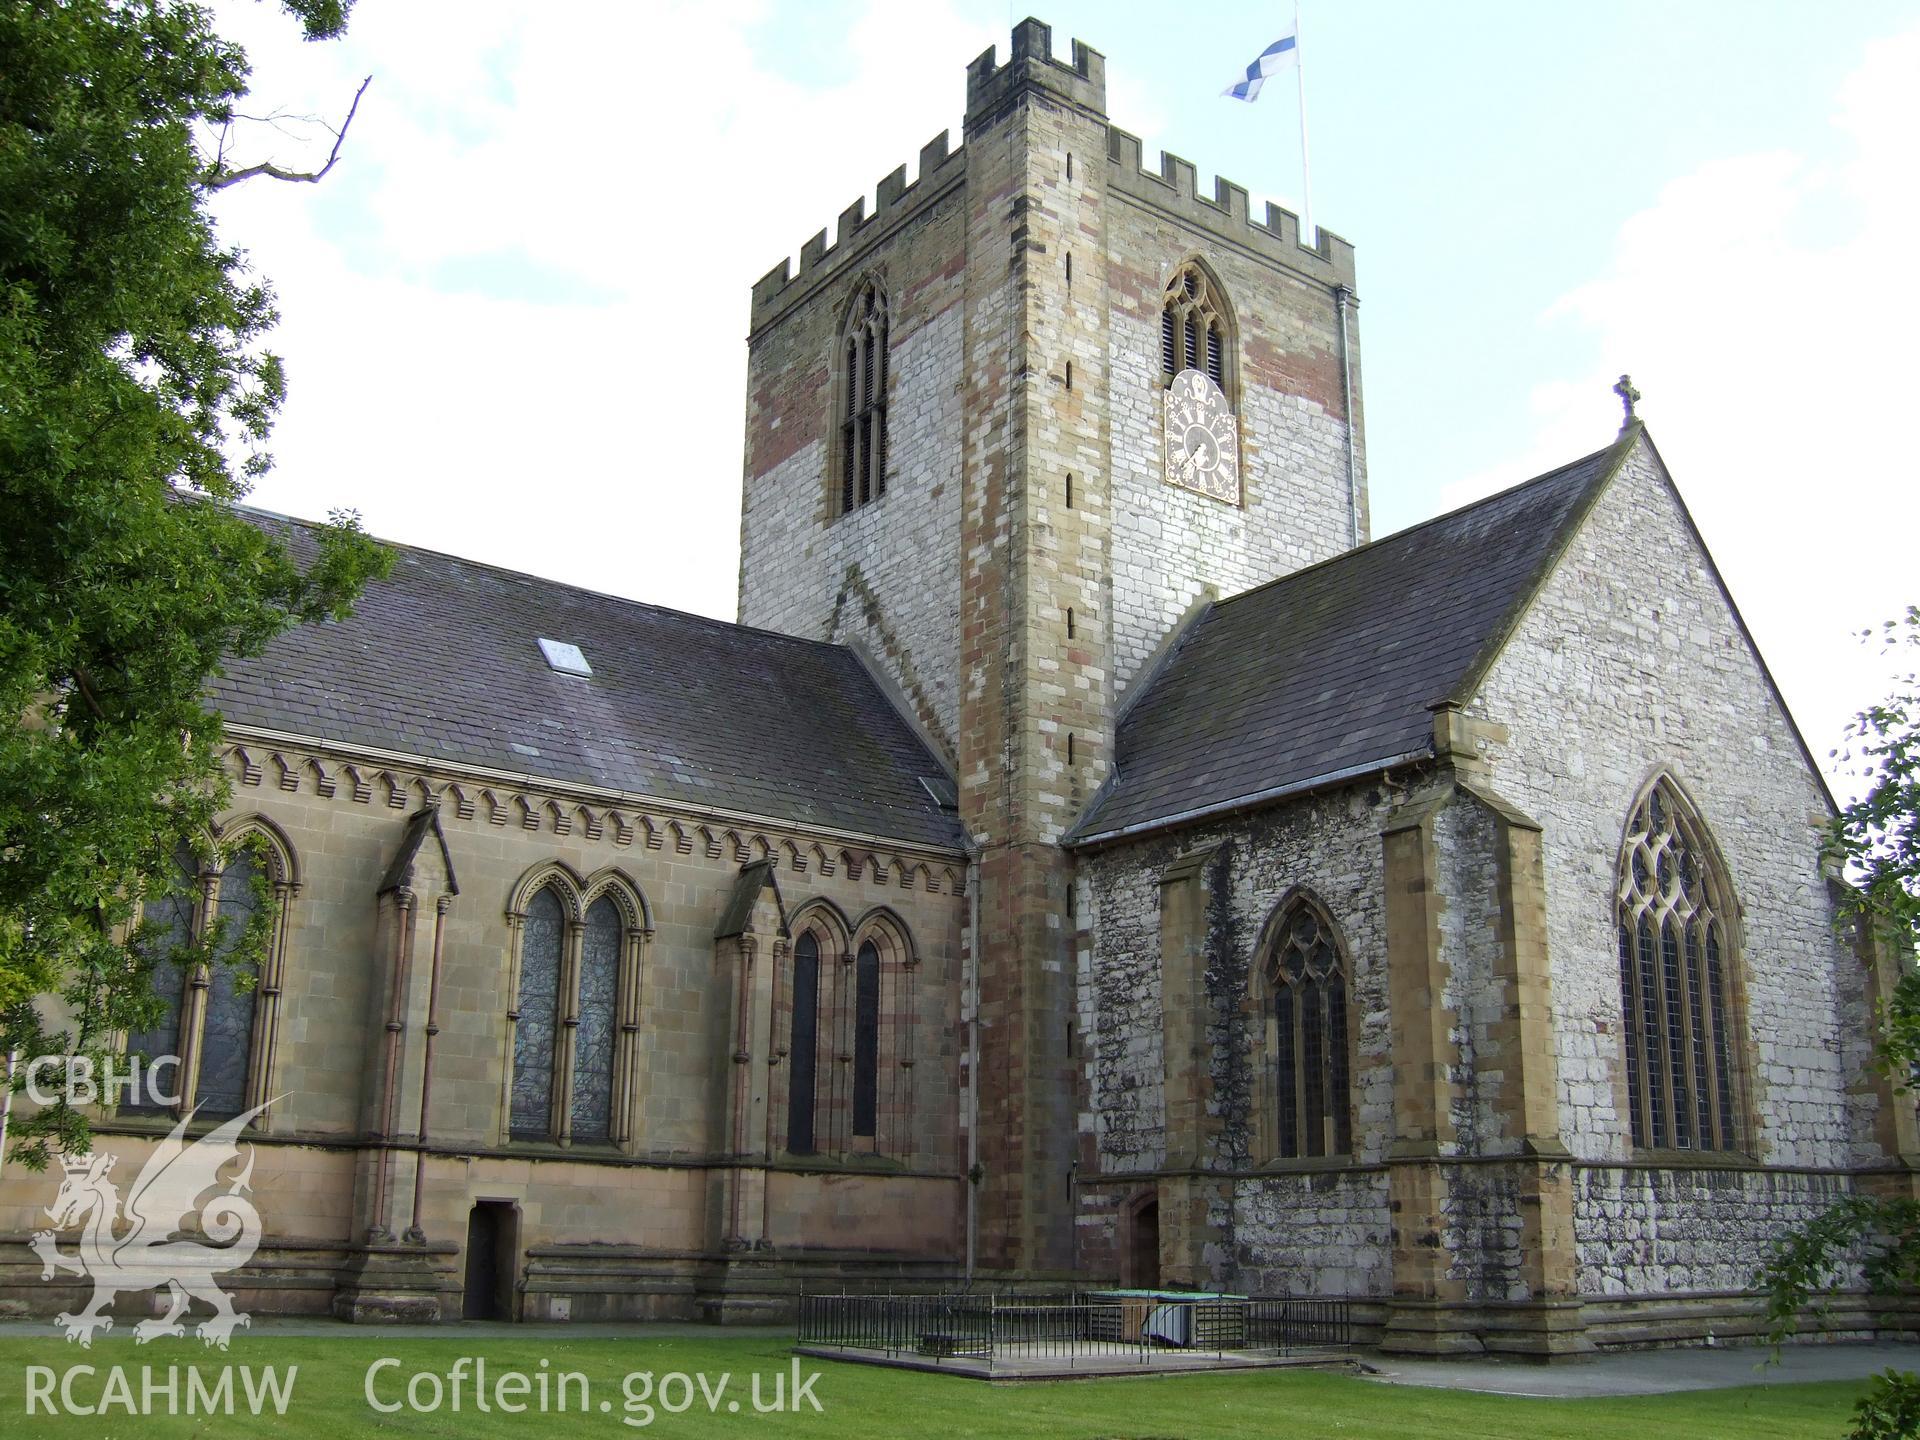 Central tower, chancel (left) and transept (right) from the south.